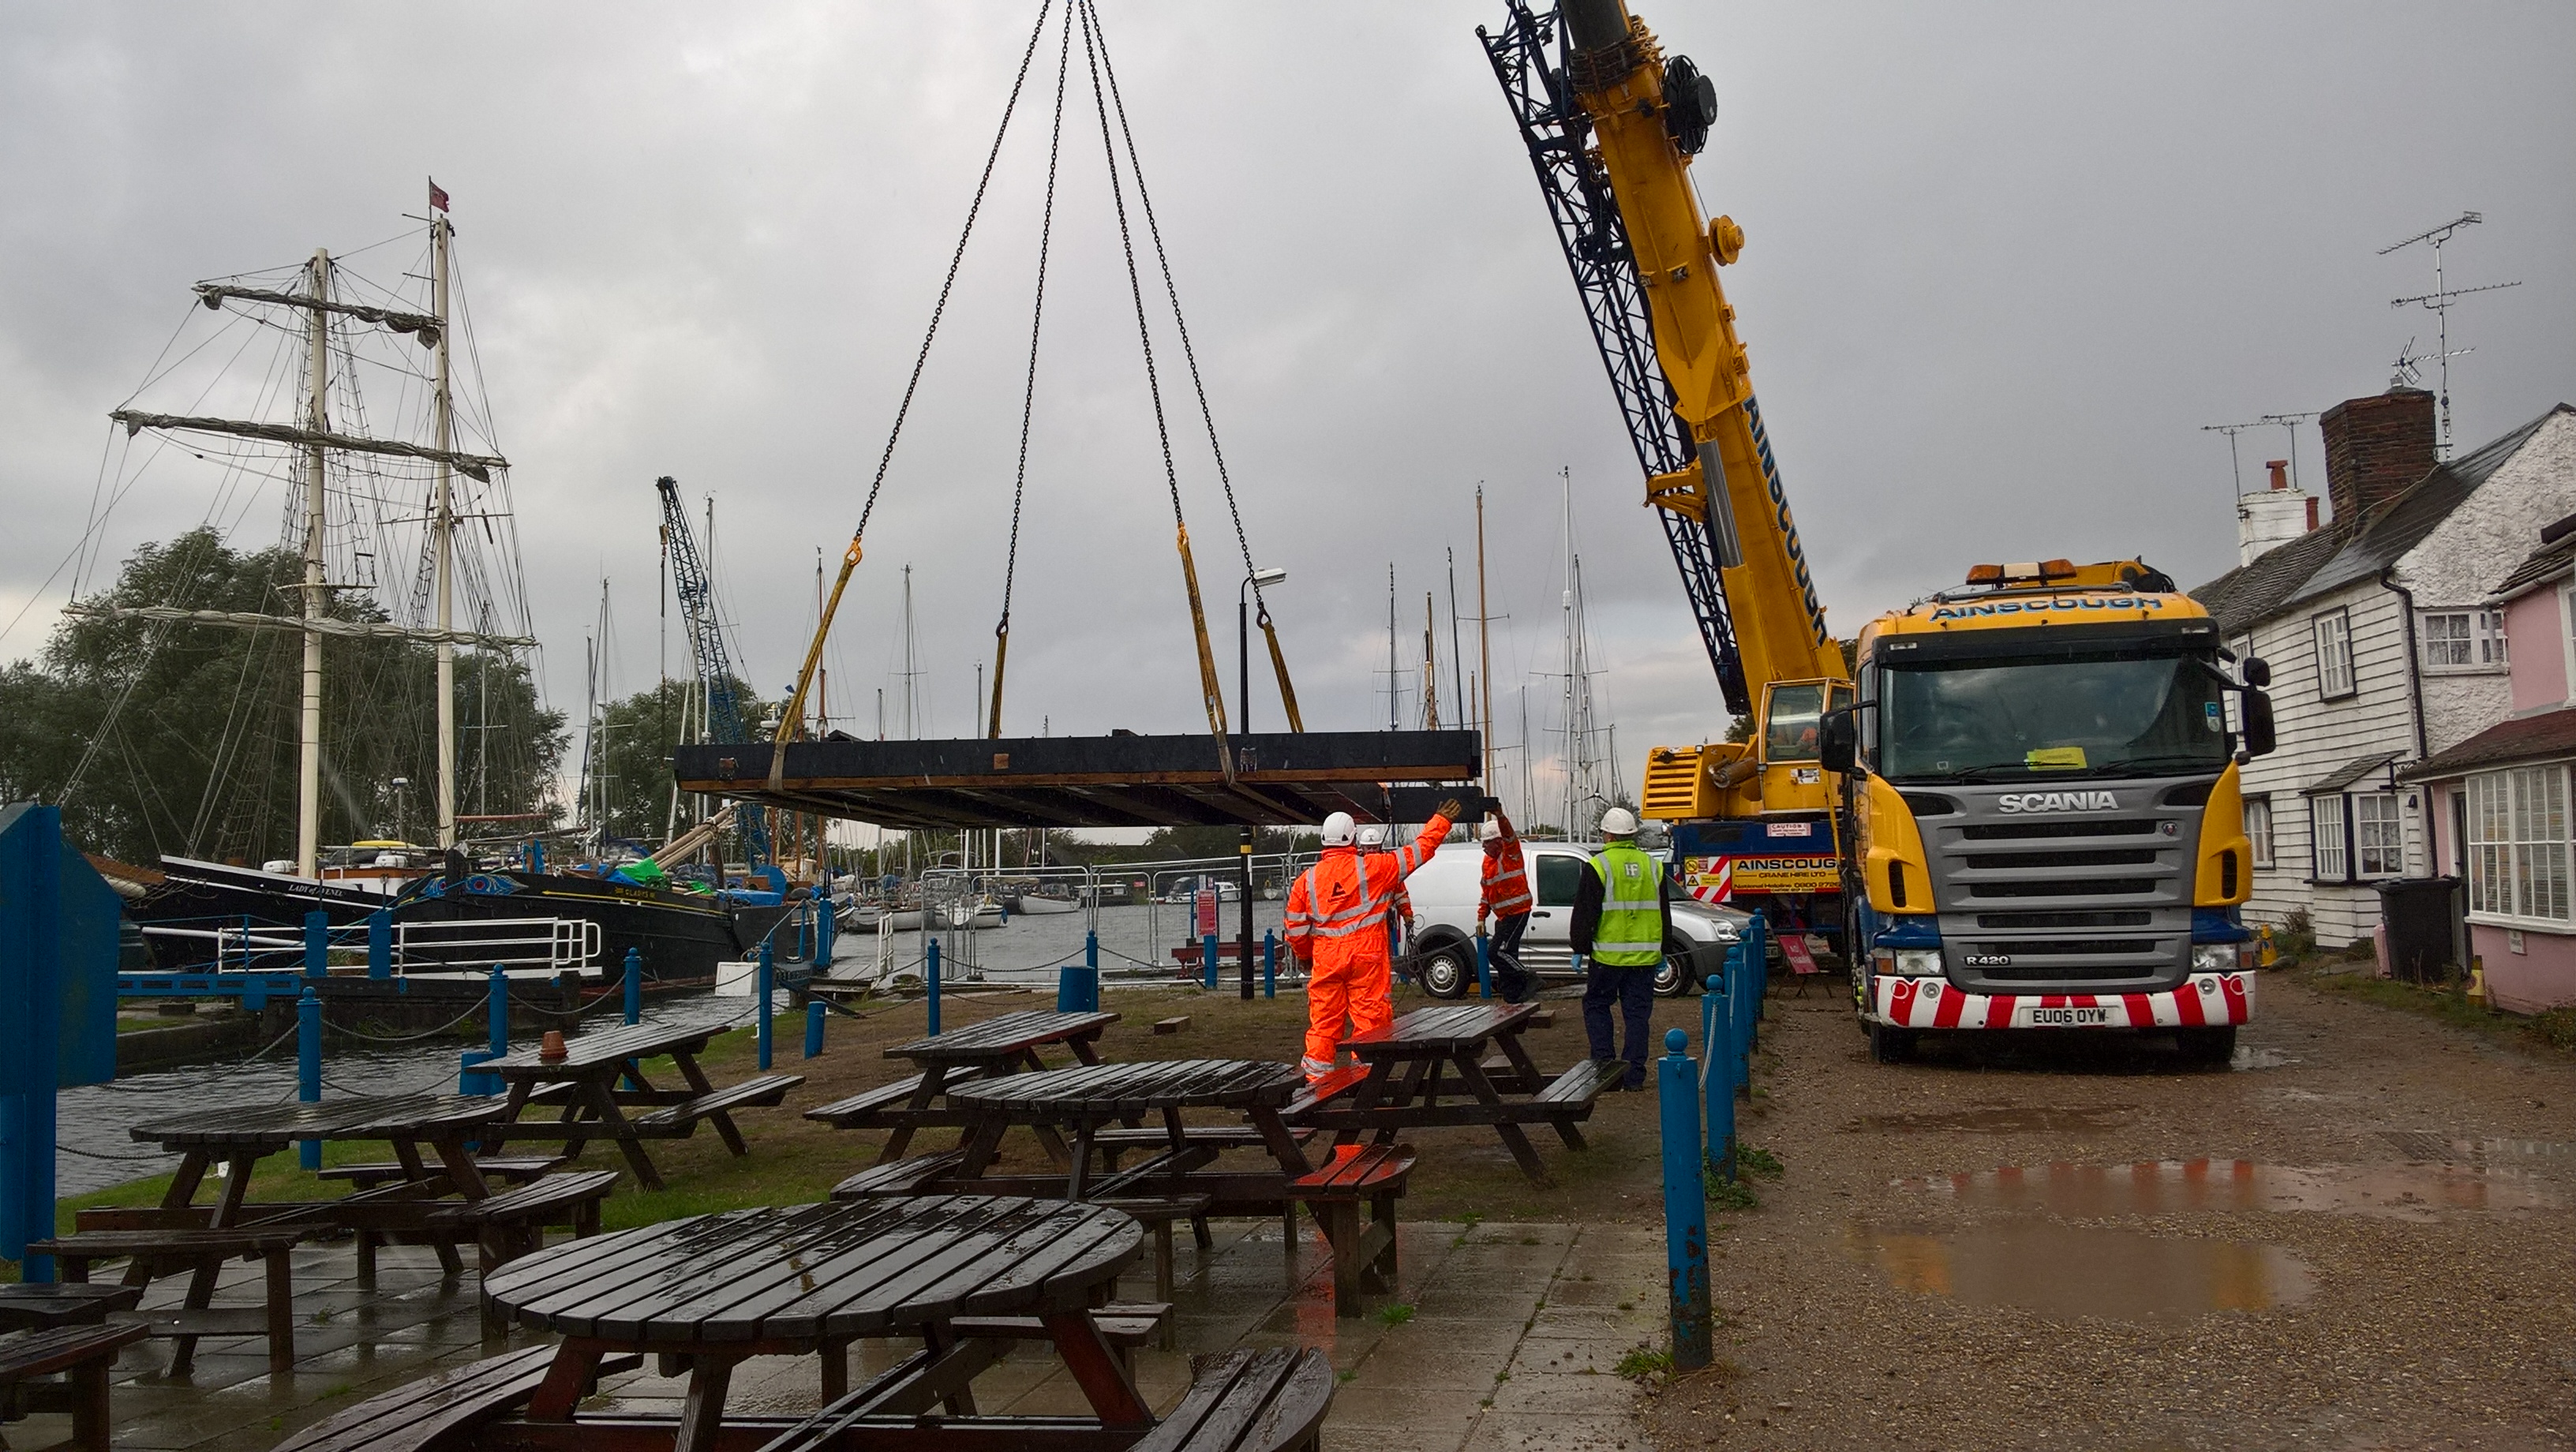 Crane lifting 1st timber gate into temporary position